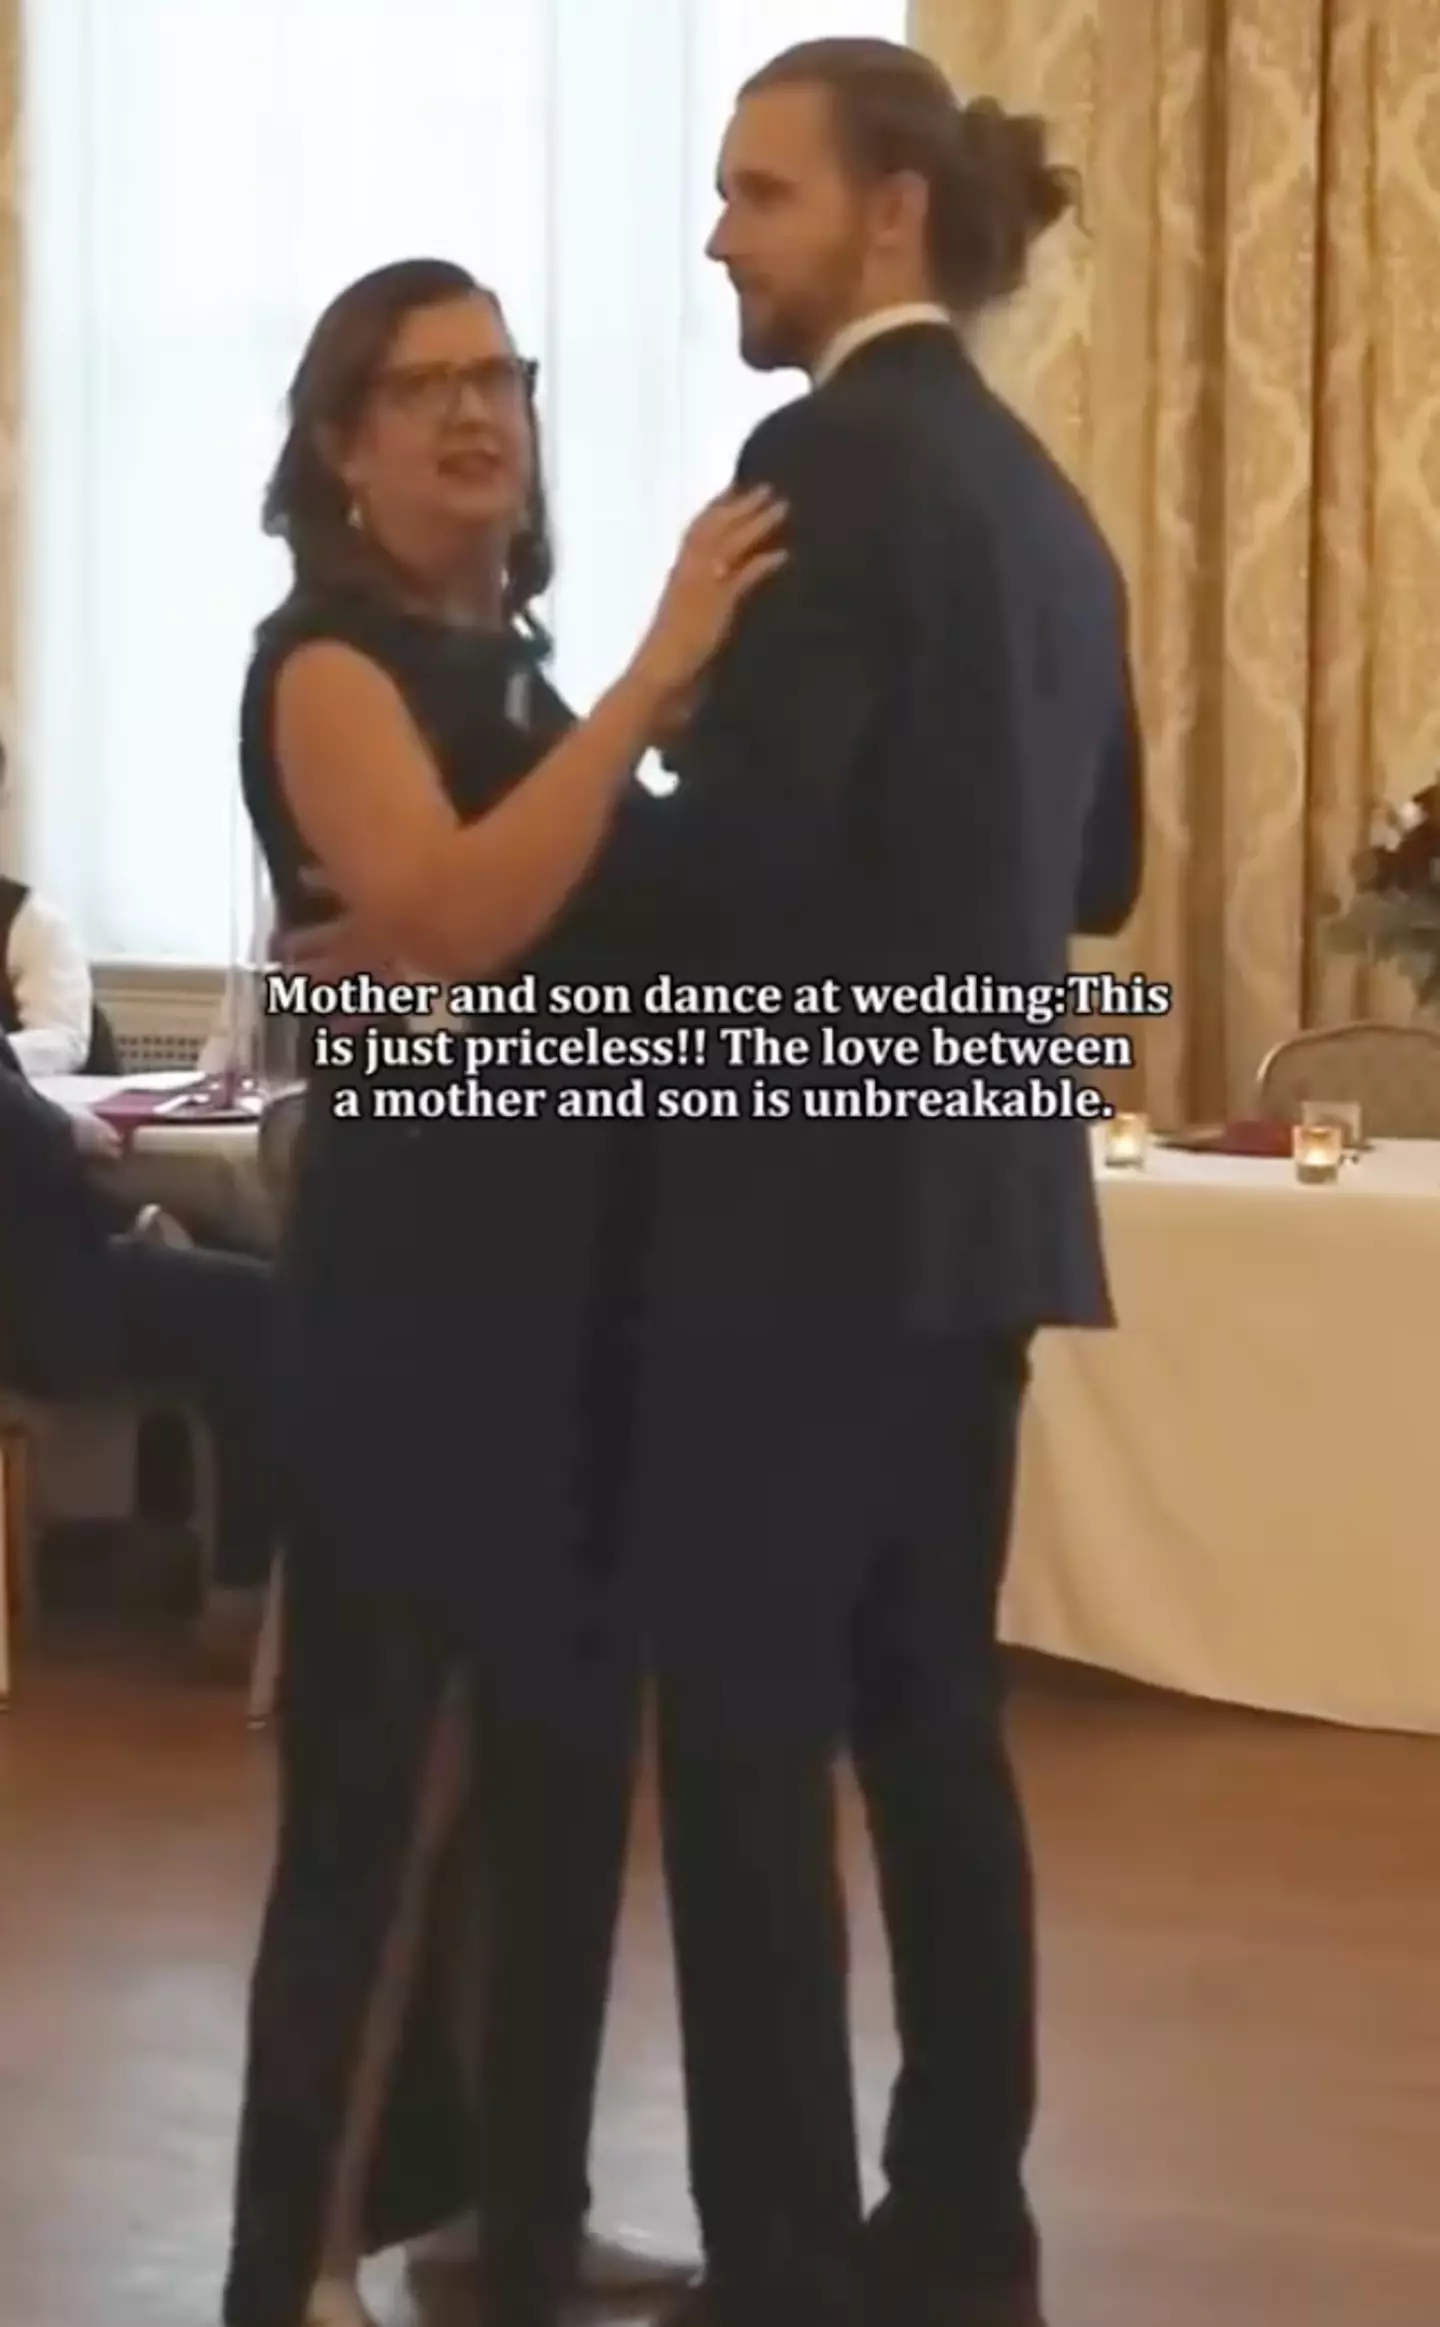 The mum and son are dancing at the wedding before the music changes.